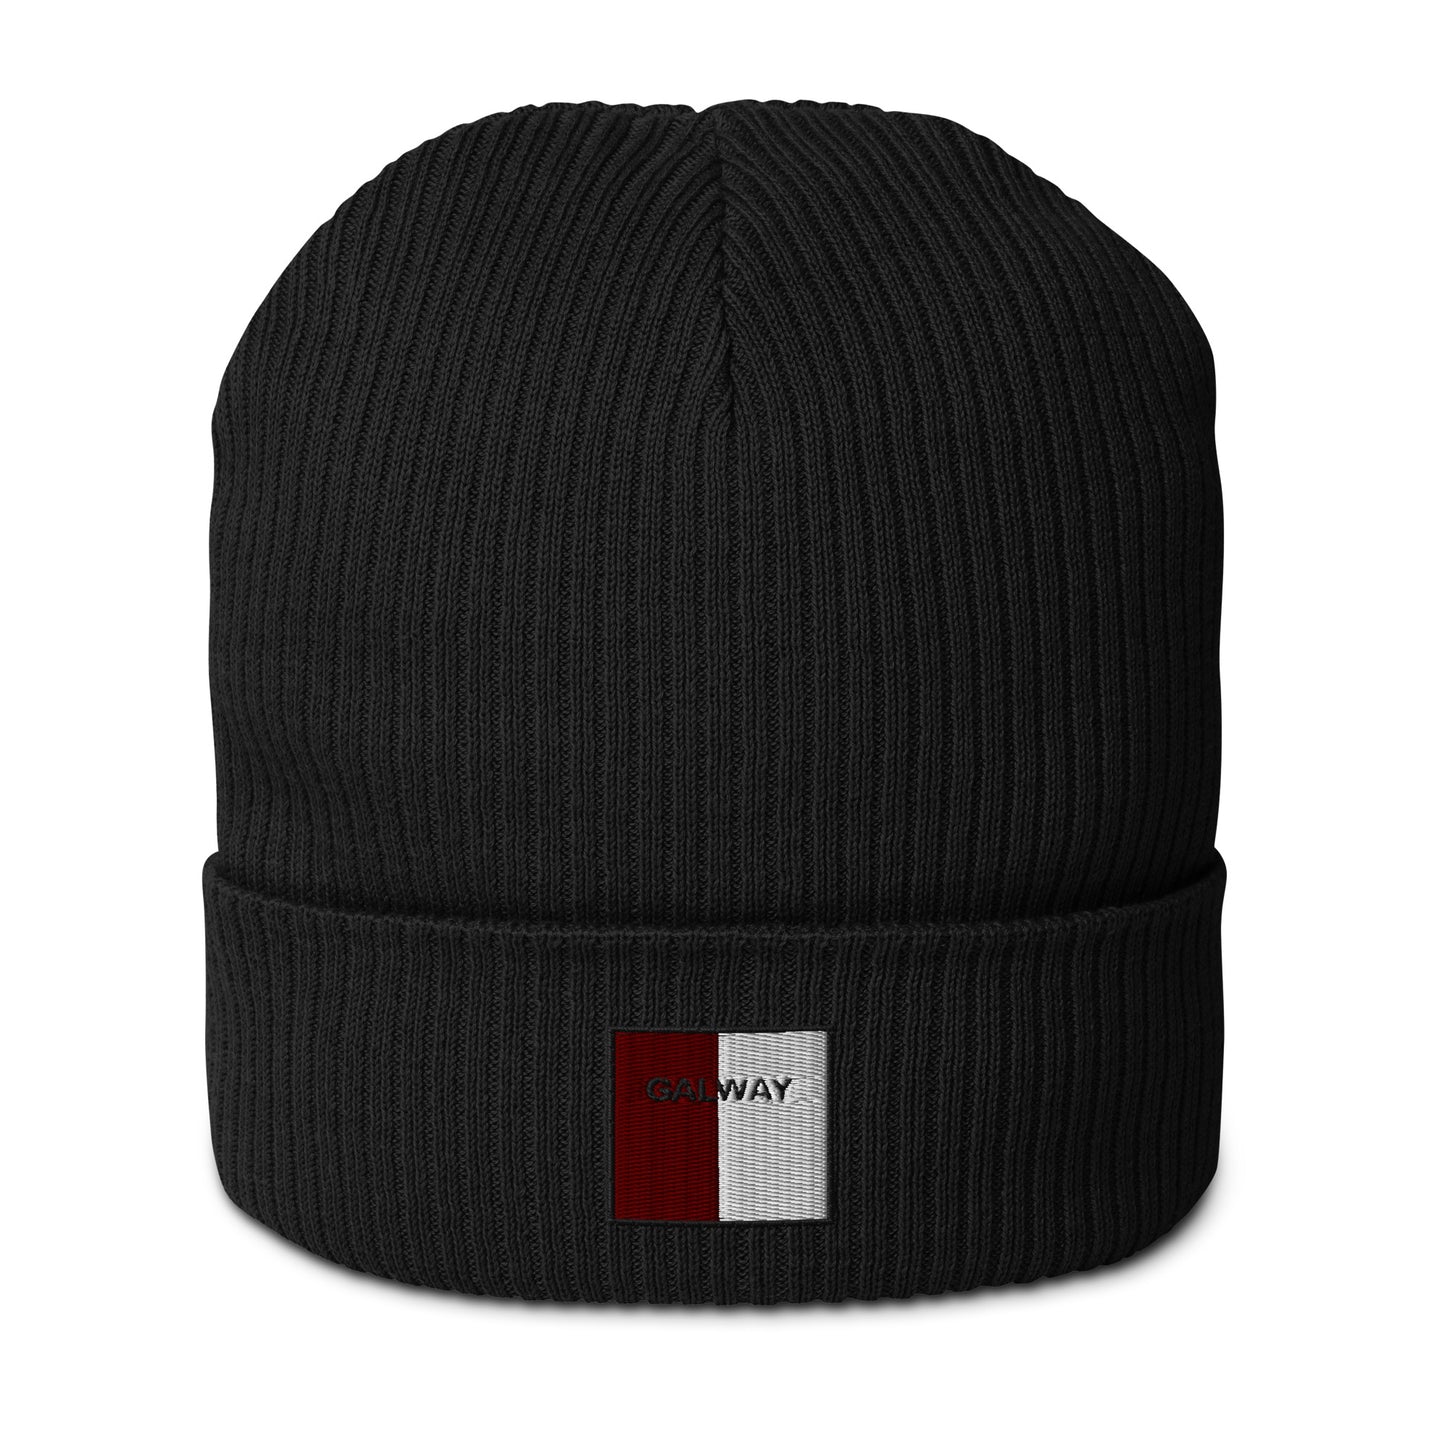 Embroidered Galway Beanie - 100% organic cotton